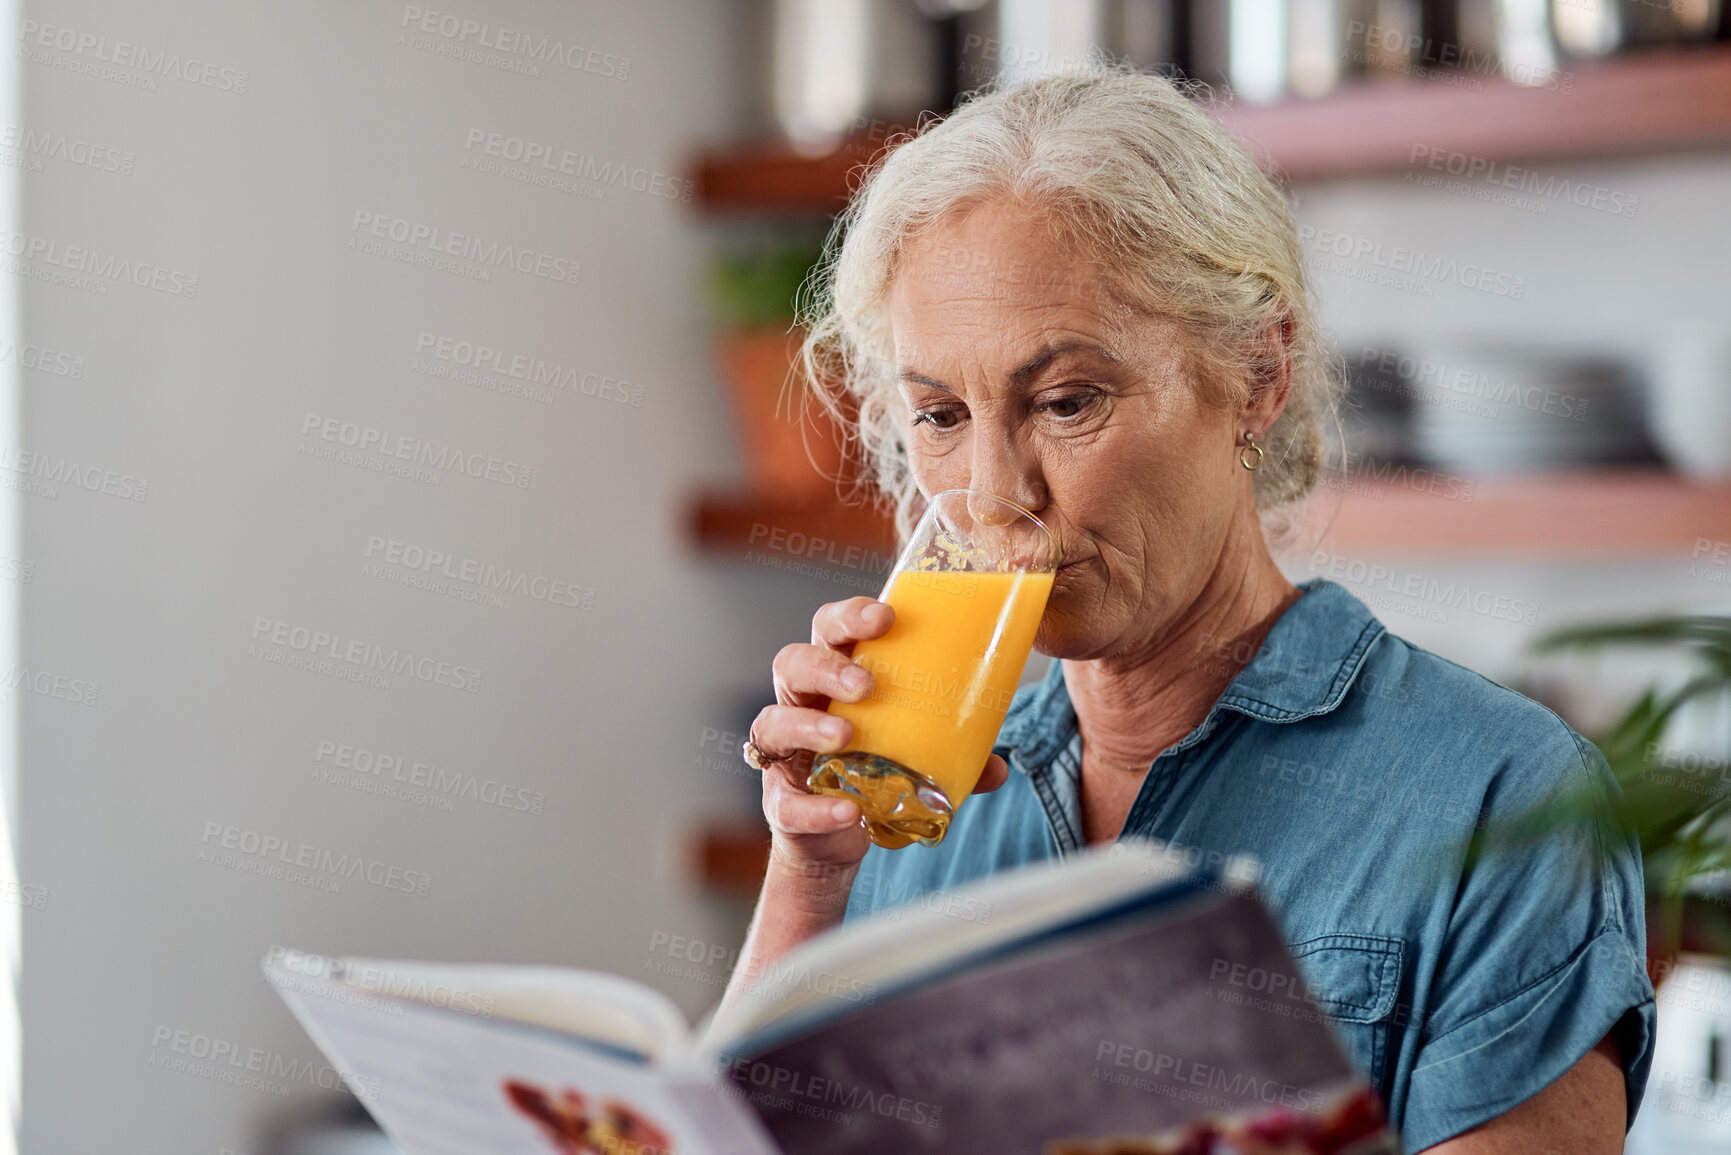 Buy stock photo Shot of a mature woman reading a book while having orange juice at home